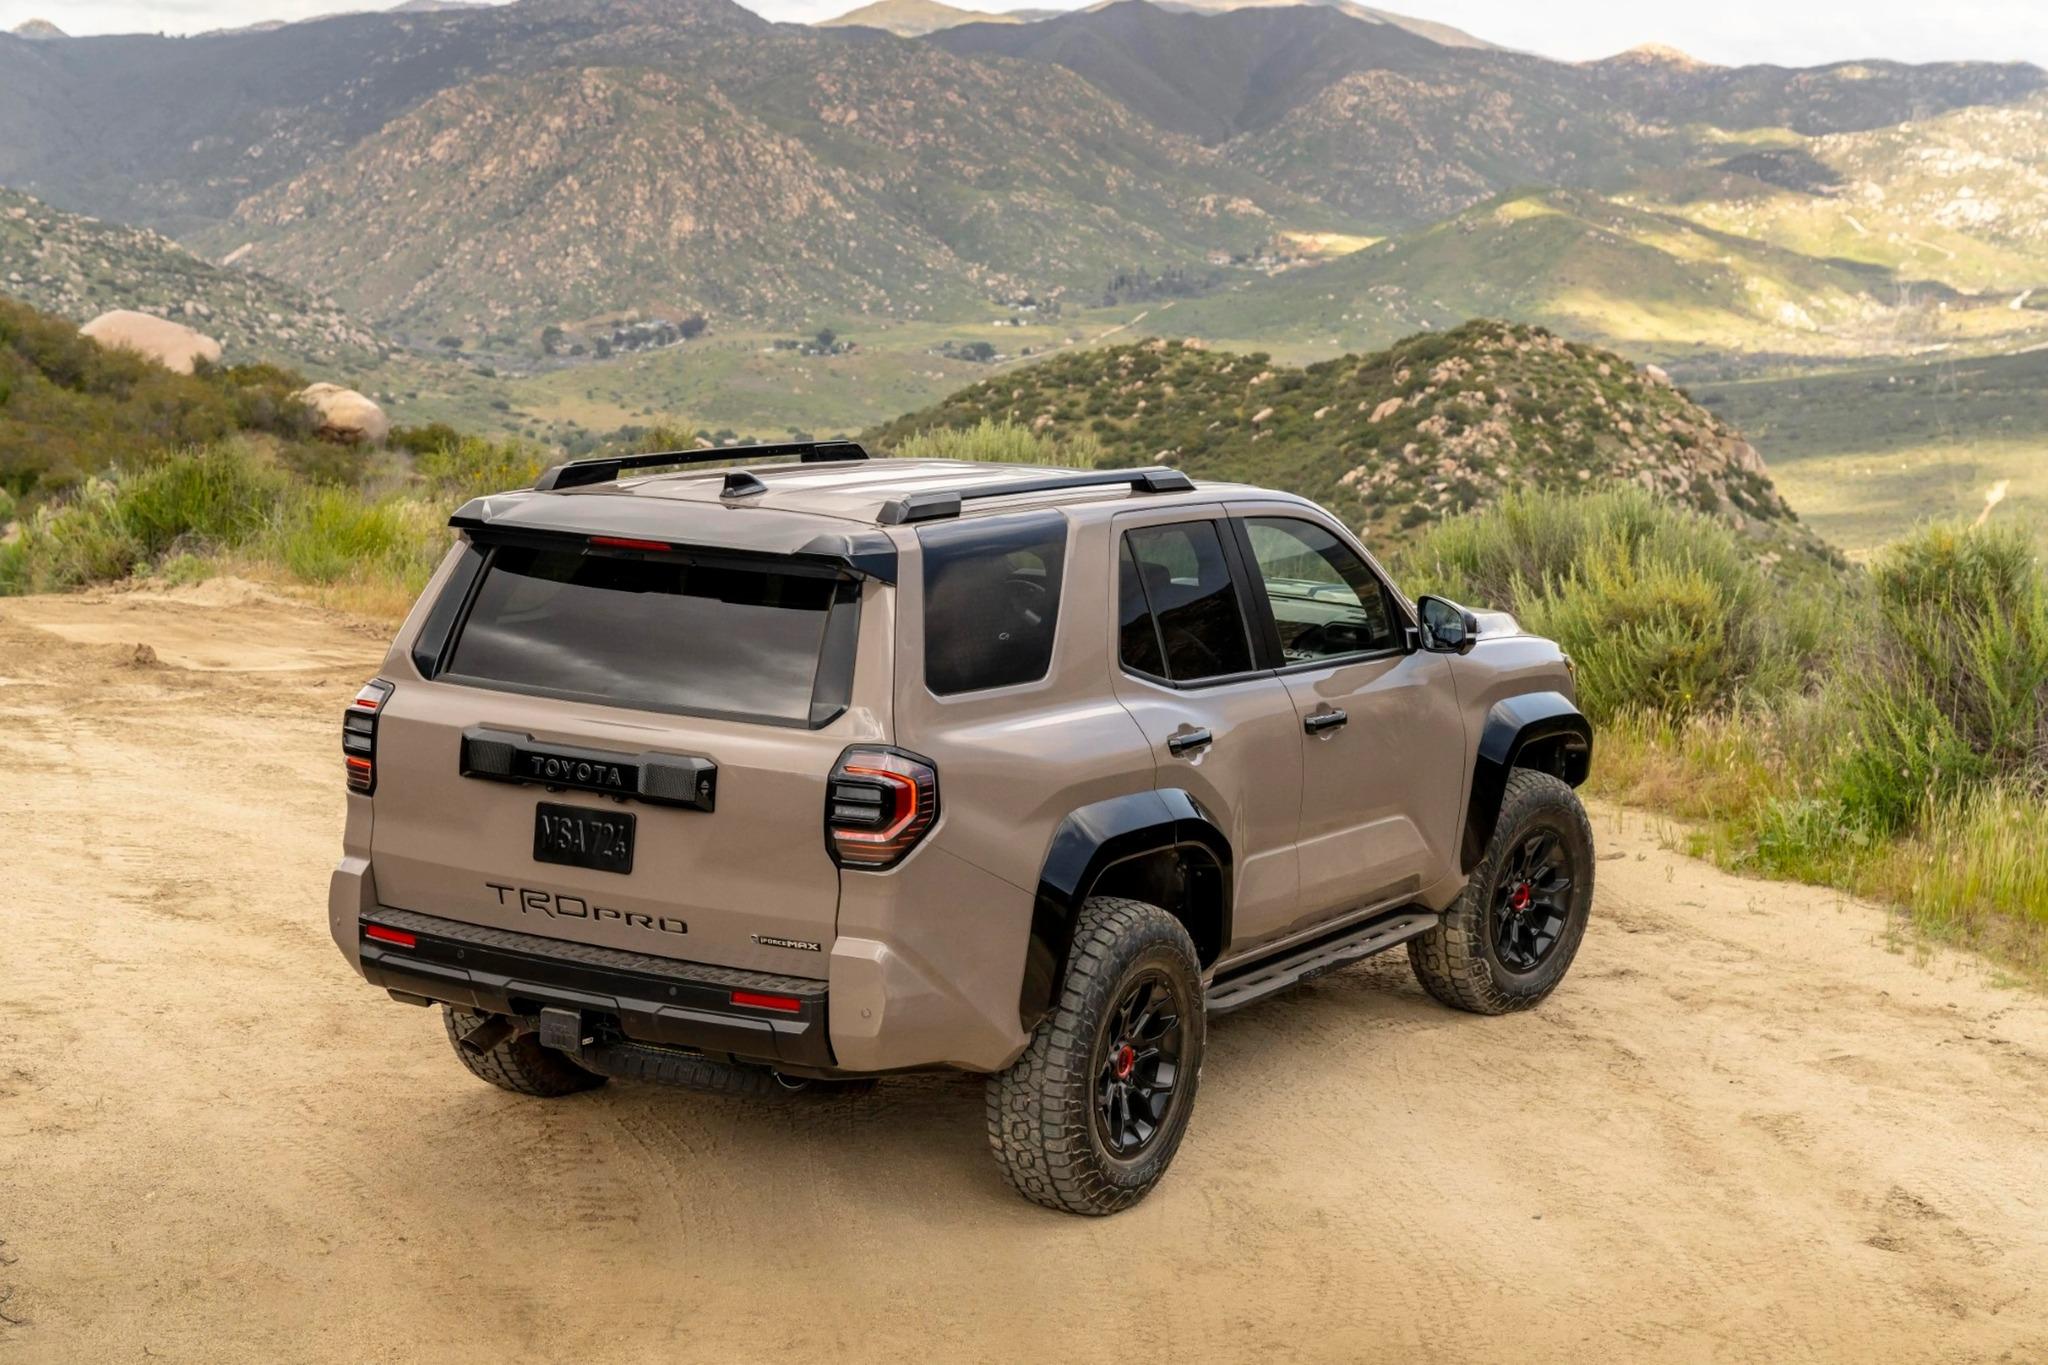 2025 Toyota 4runner 2025 4Runner Photos & Specs! 🔥 Trailhunter, TRD Pro, Off-Road, Limited Trims 2025-toyota-4runner-wallpapers-3-